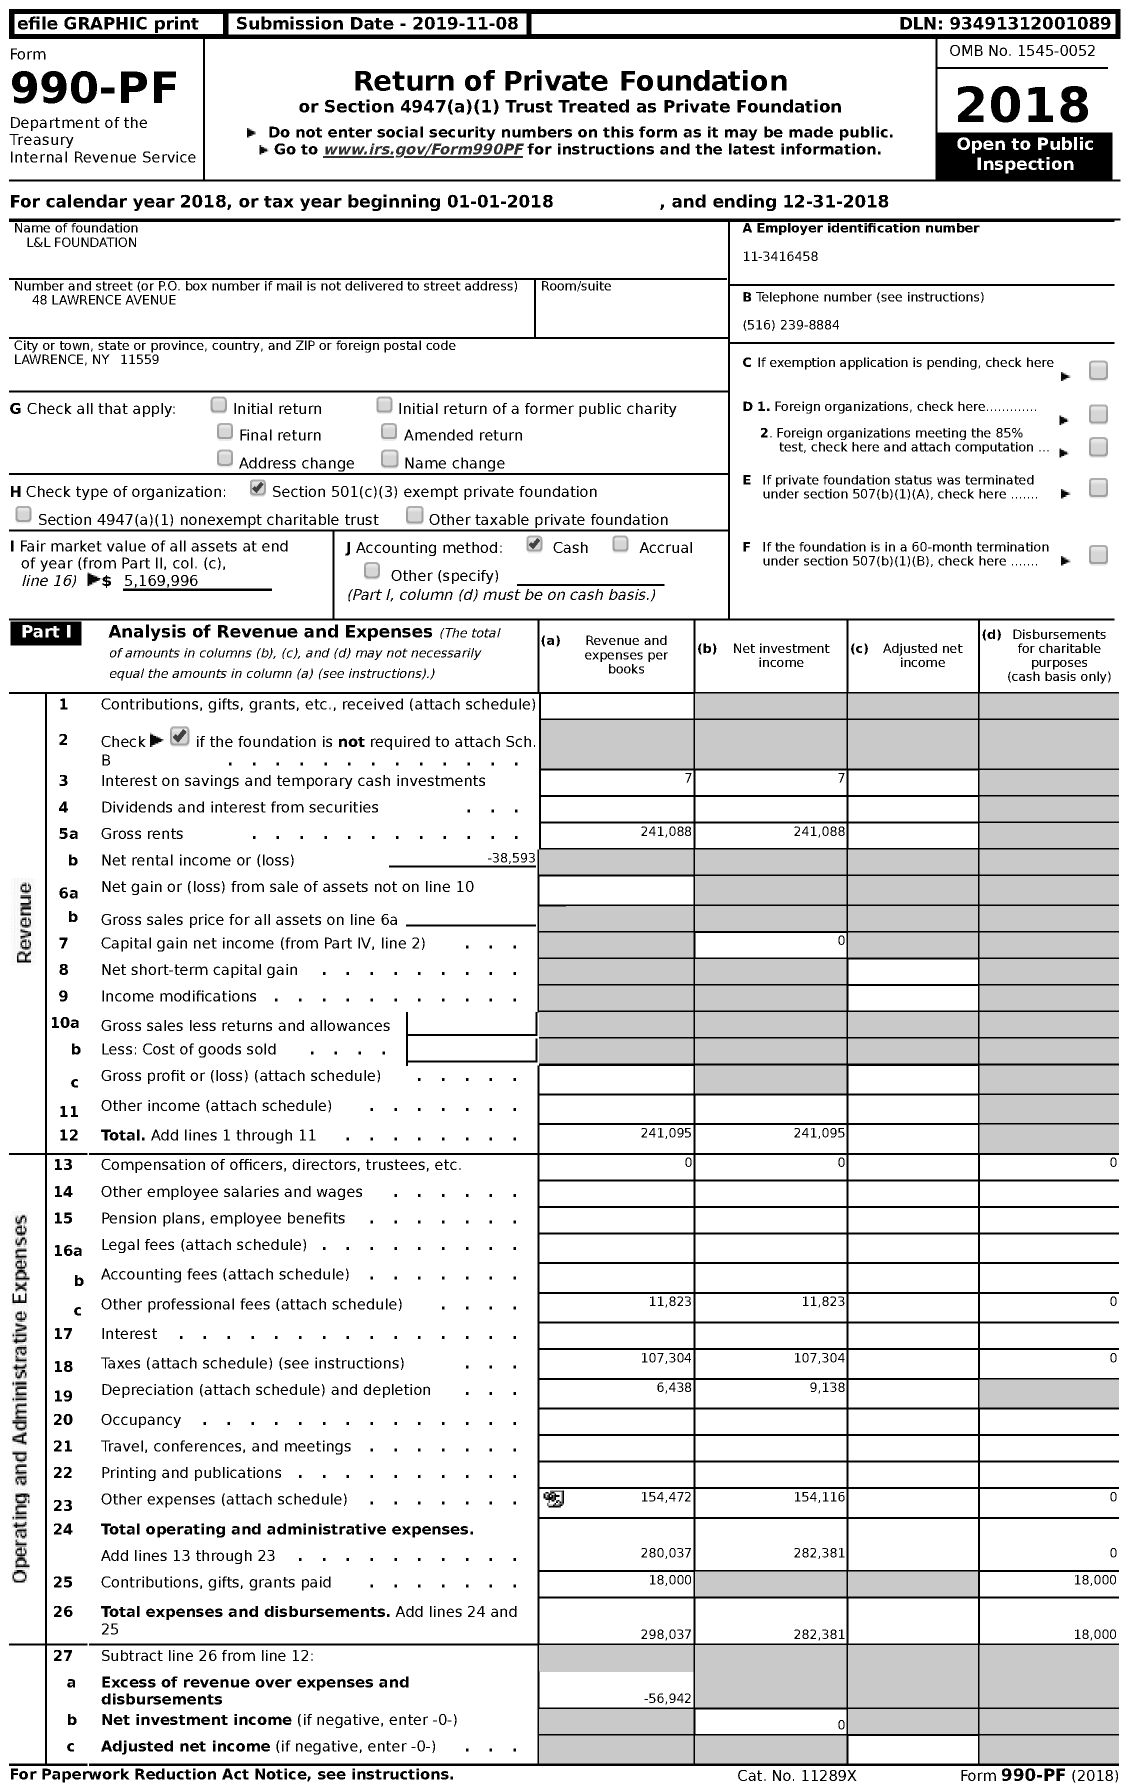 Image of first page of 2018 Form 990PF for L&L Foundation